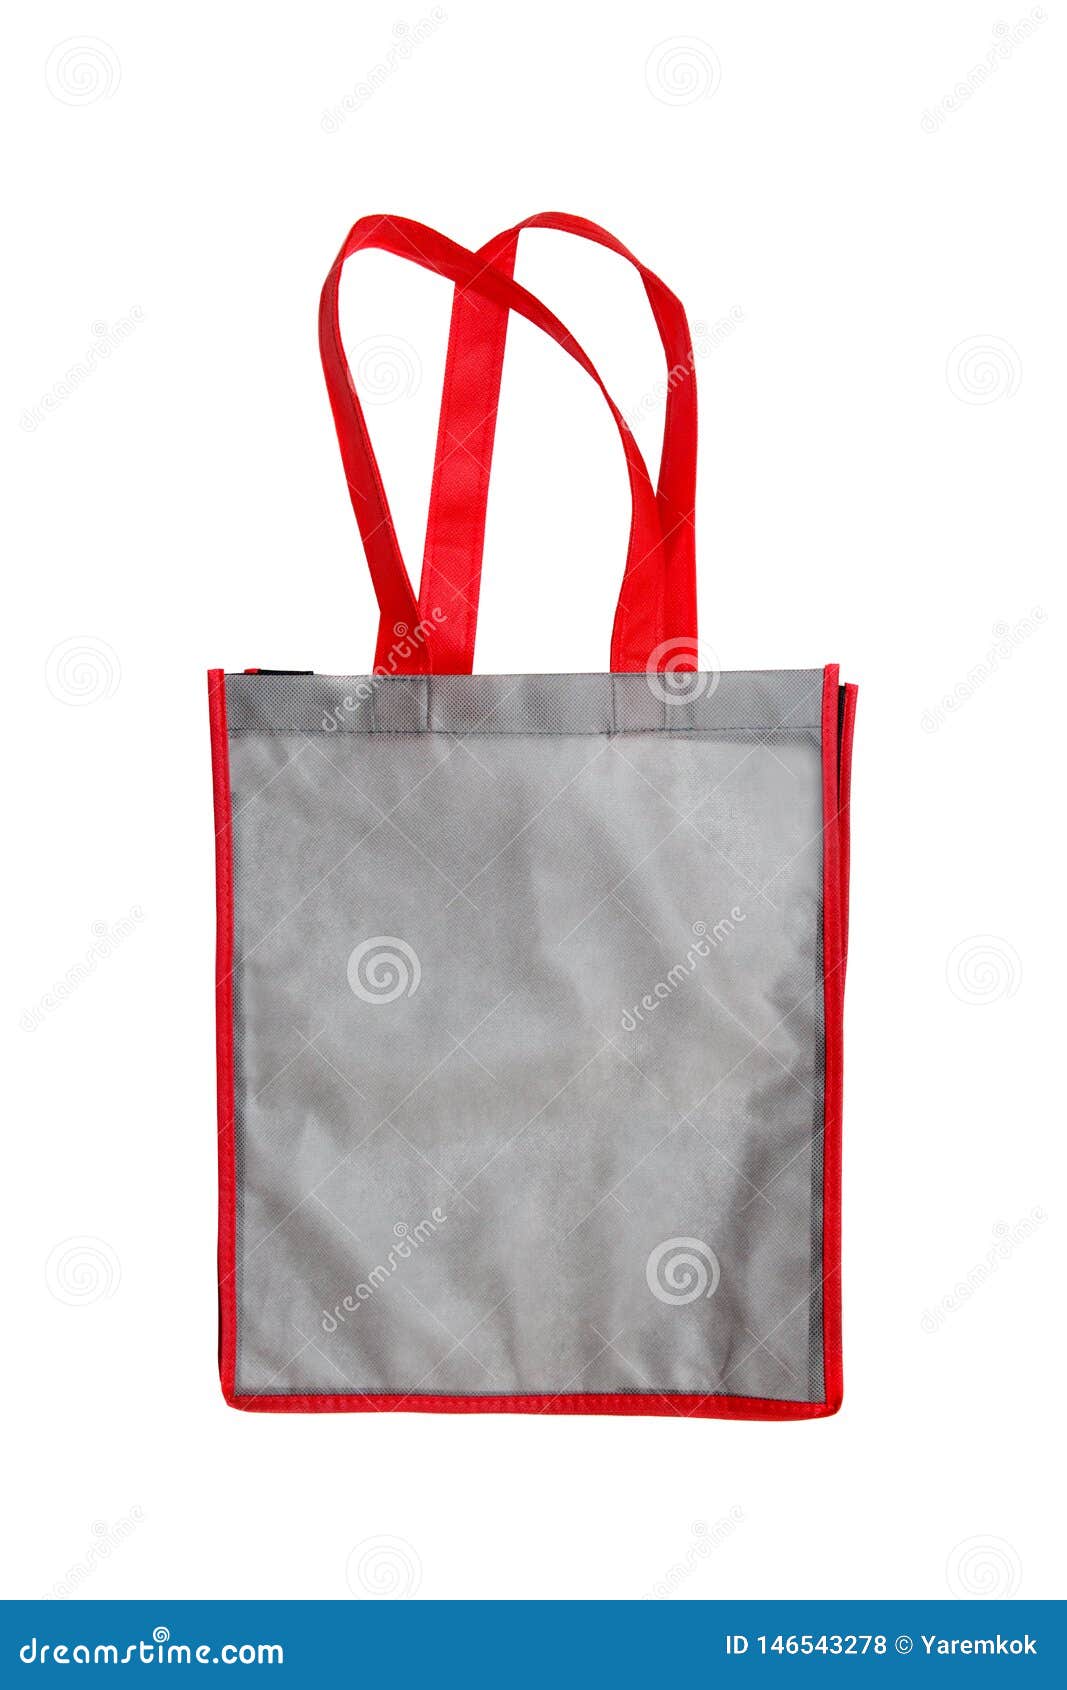 Download Grey Fabric Canvas Bag For Shopping Isolated On White ...